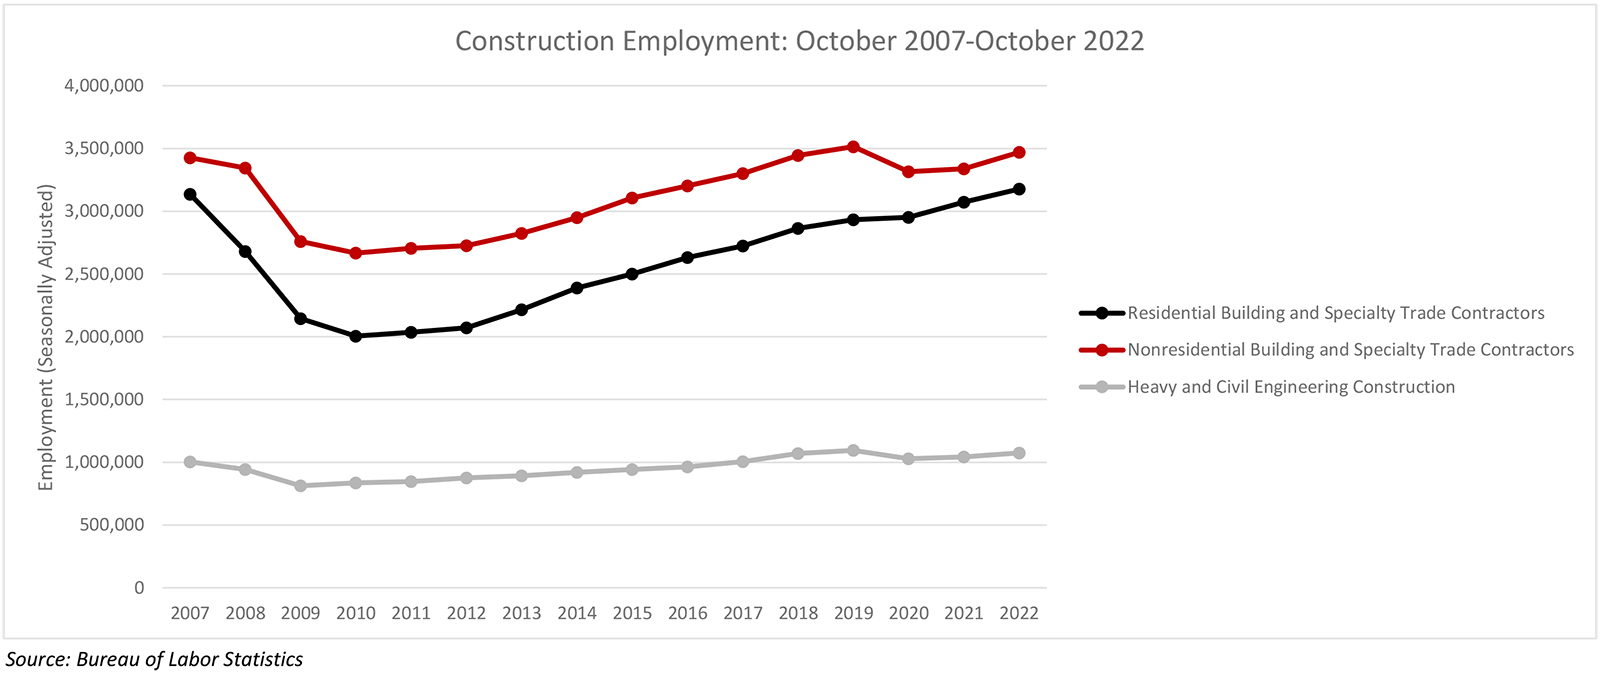 October Construction Employment Up by 1,000